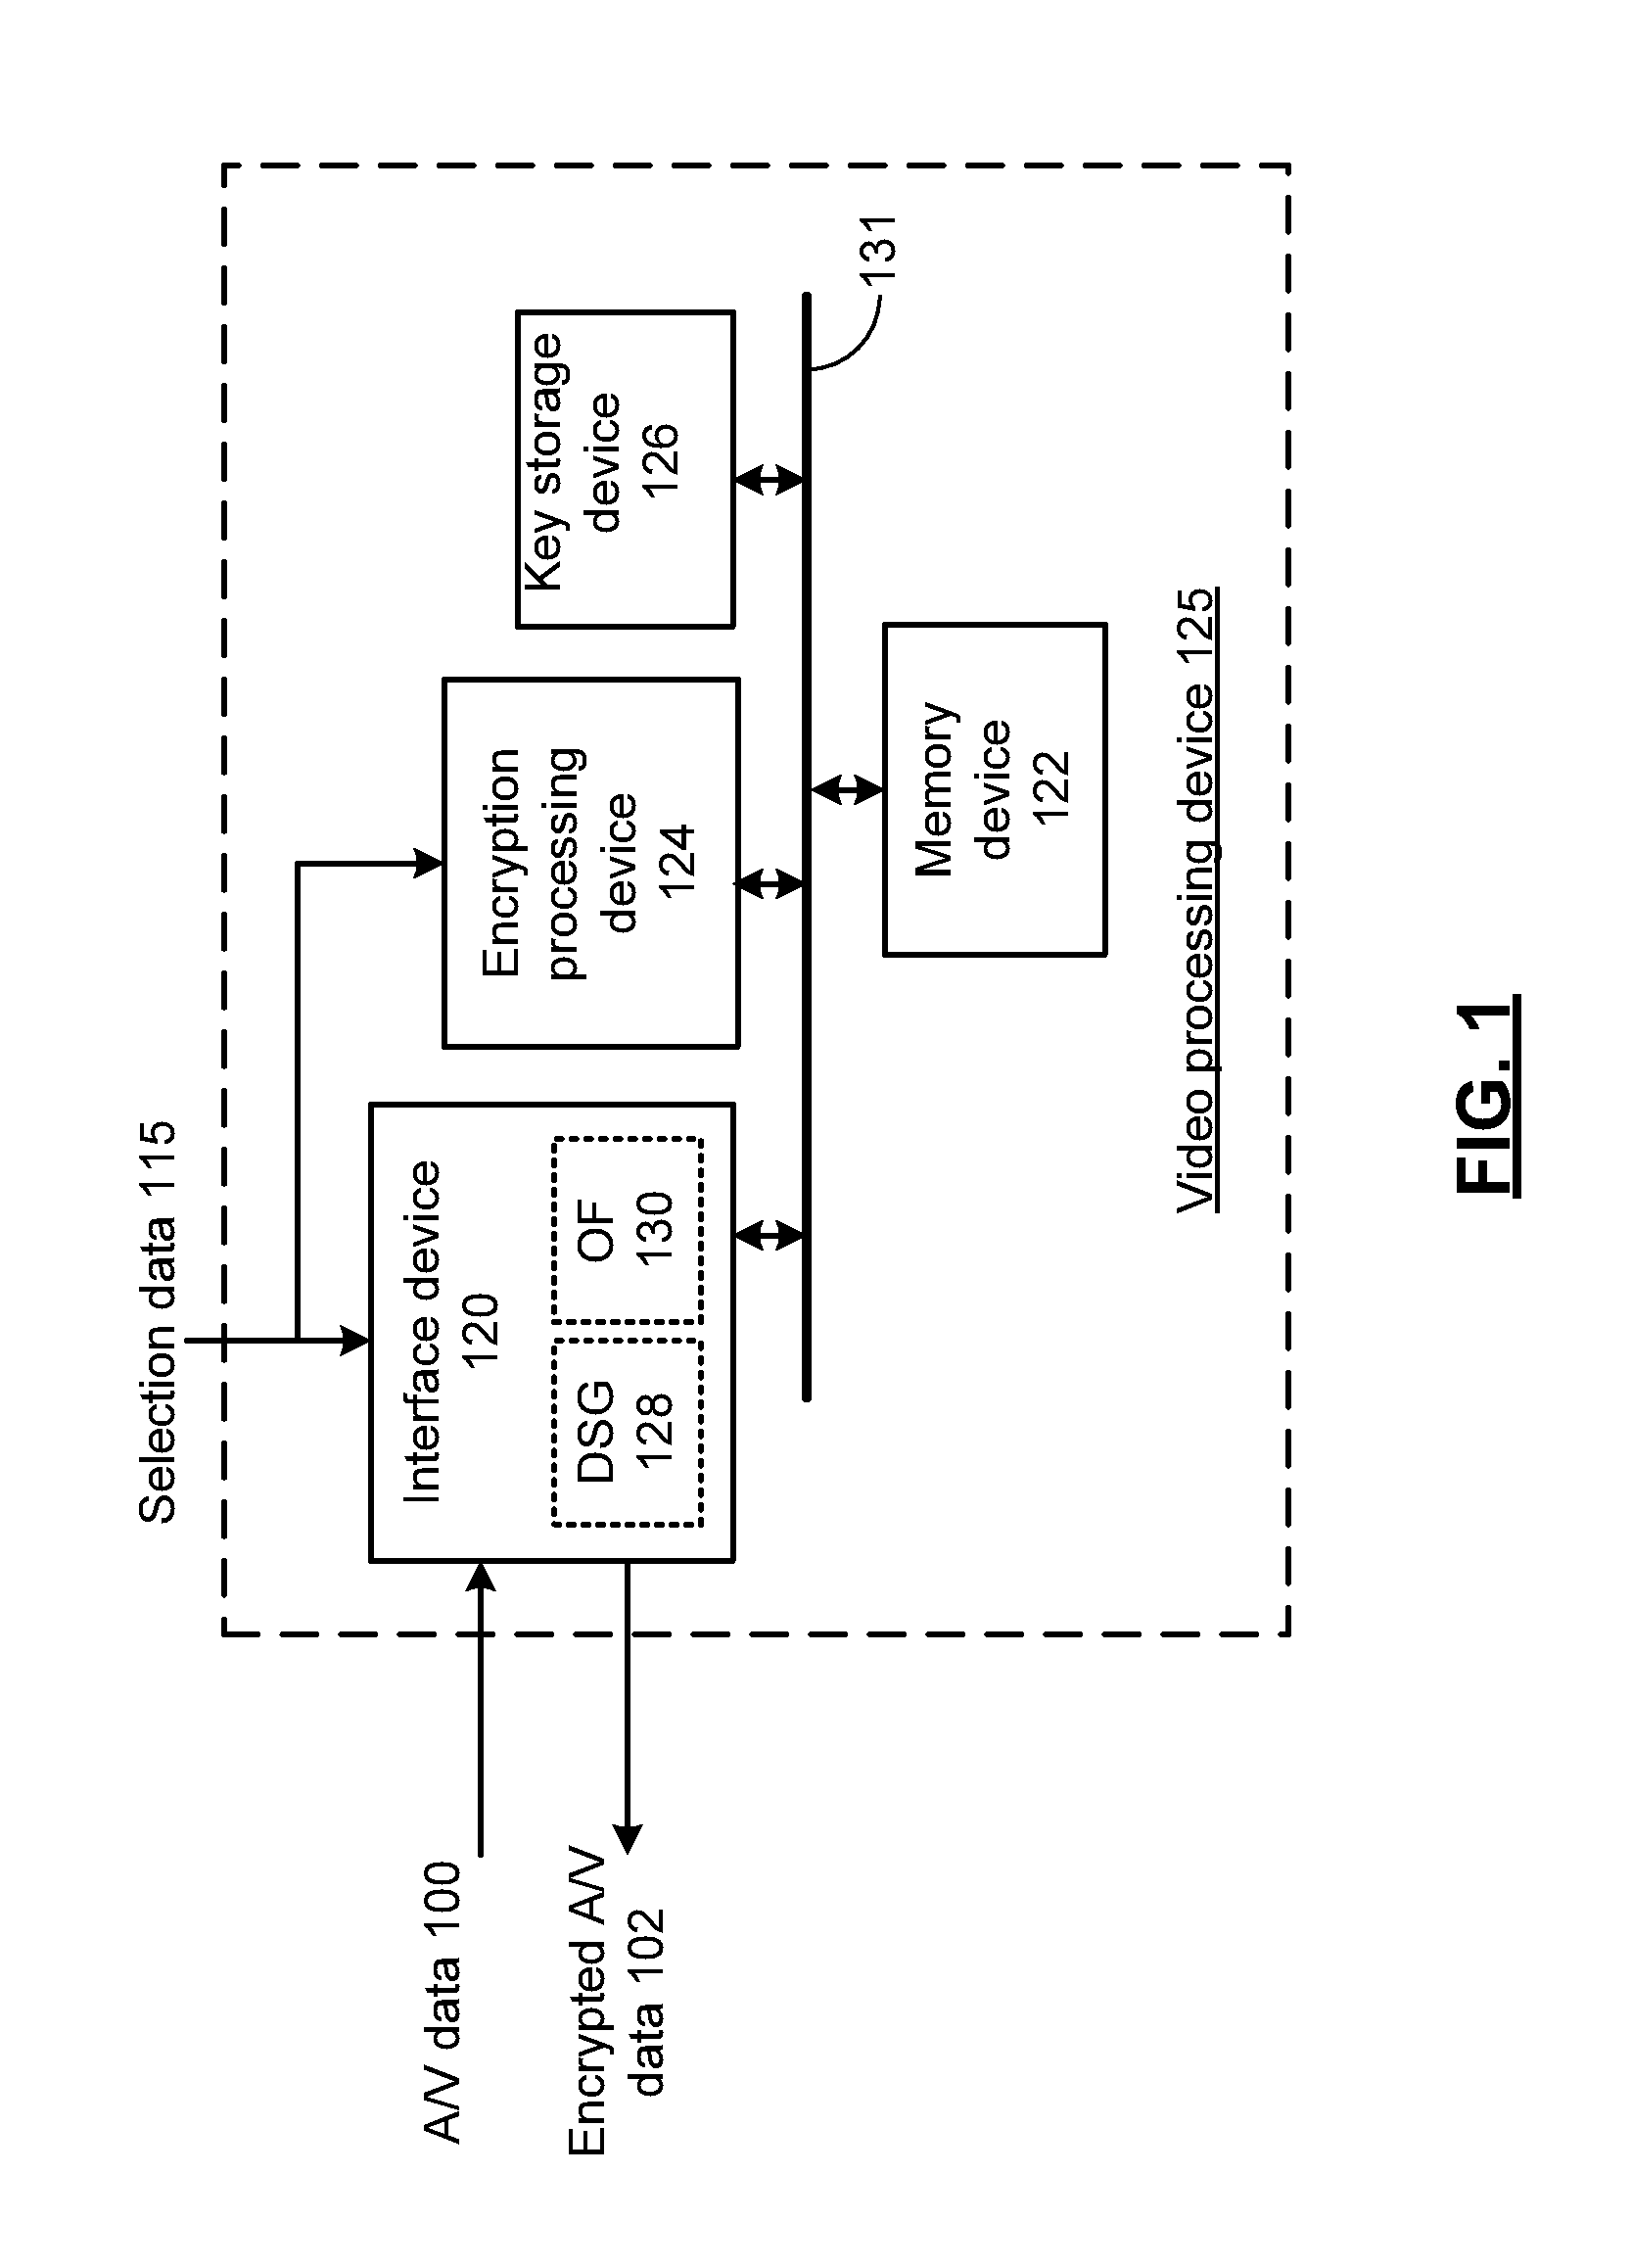 Adaptable encryption device and methods for use therewith